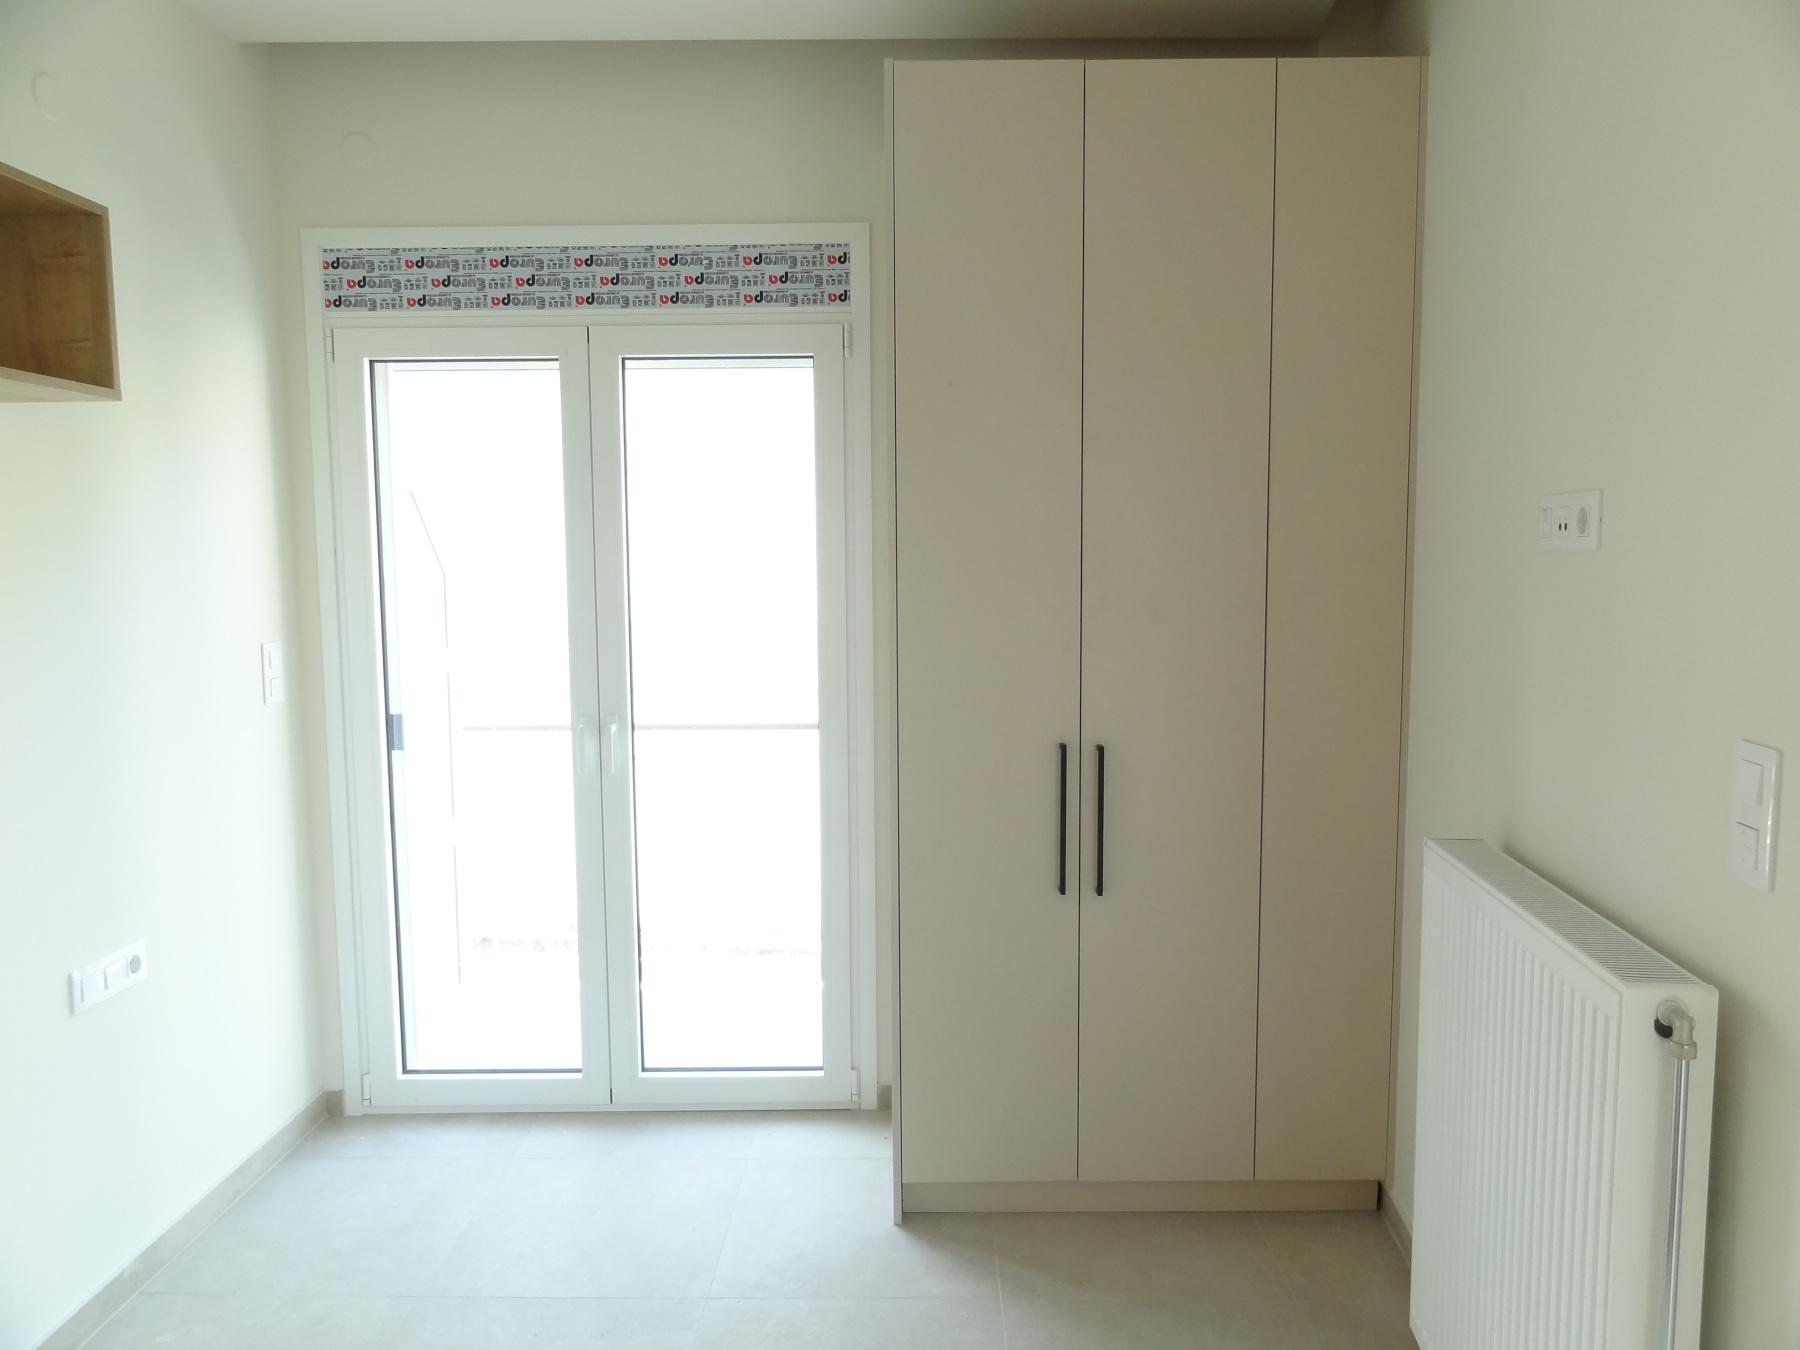 Studio for rent 31 sq.m. 3rd floor fully renovated in 2023 in a very central part of Ioannina